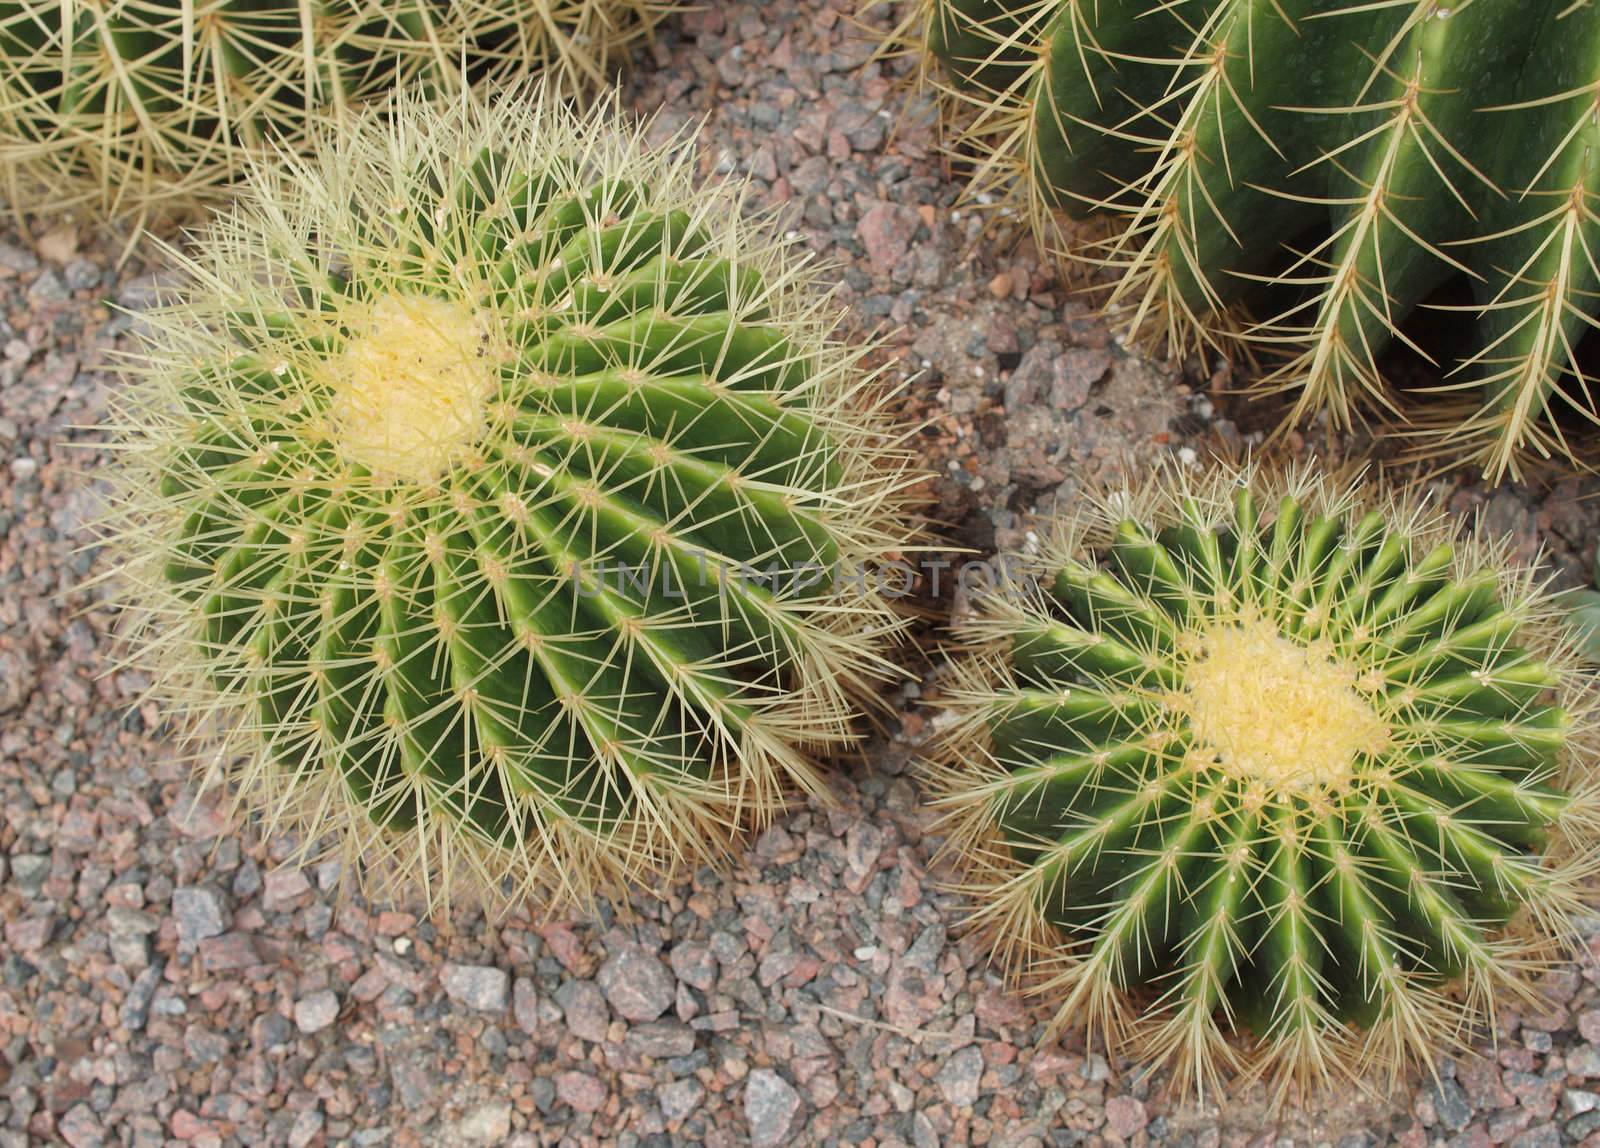 low angle image of cactus or cacti with detailed spines    